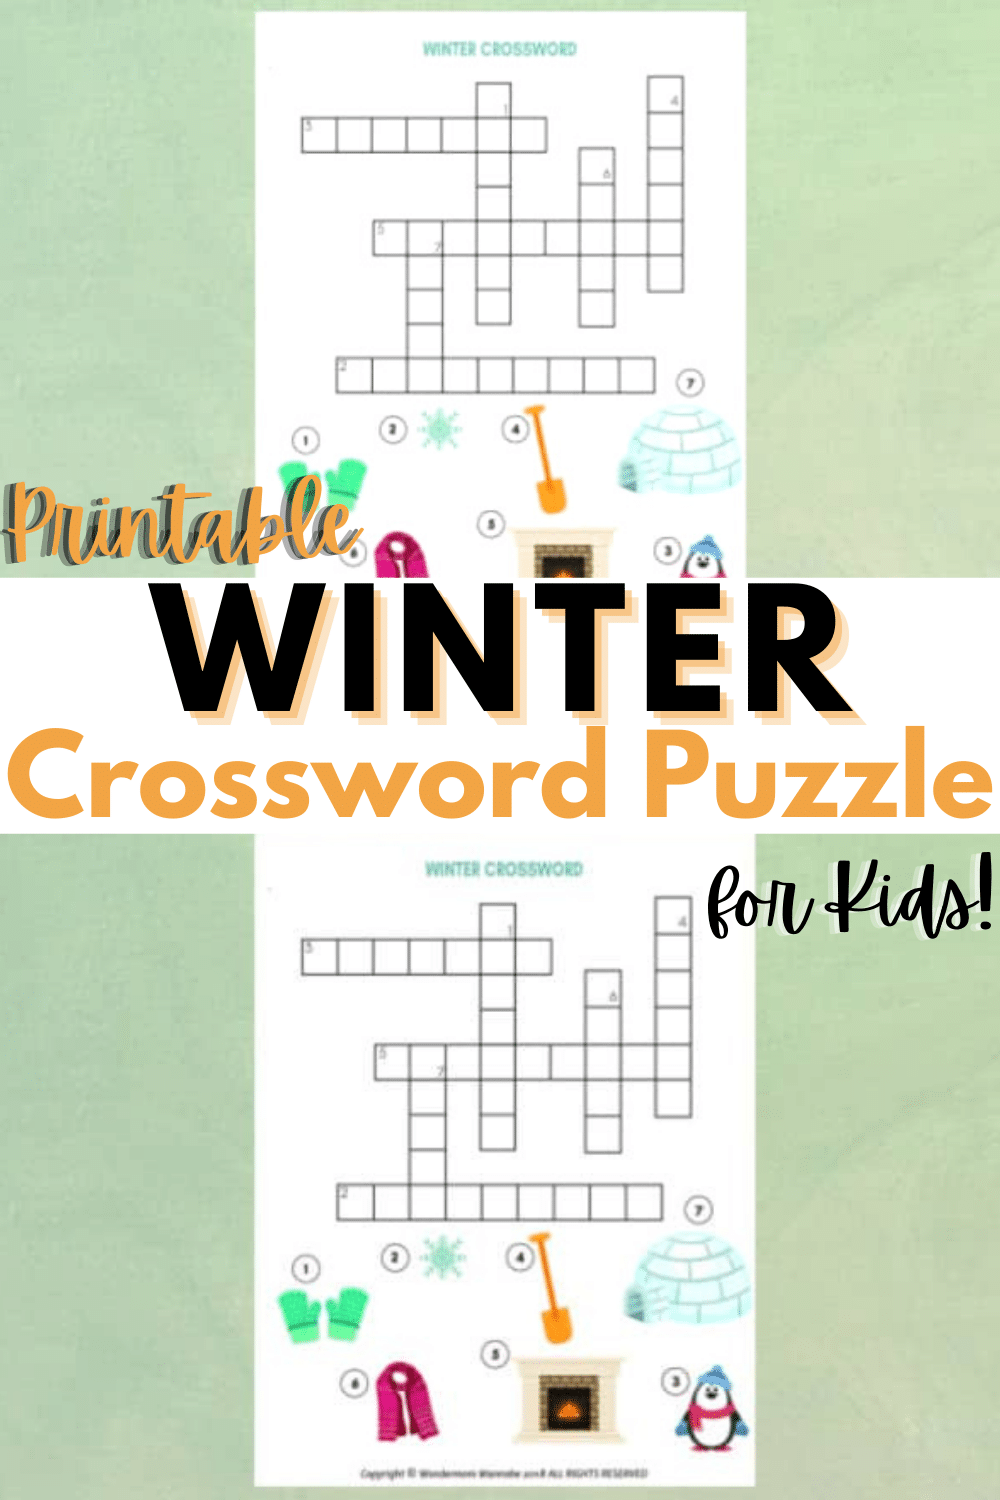 This printable winter crossword puzzle for kids is a great children's activity to complete on those cold winter days when staying indoors is required. #crosswordpuzzle #printables #winter via @wondermomwannab